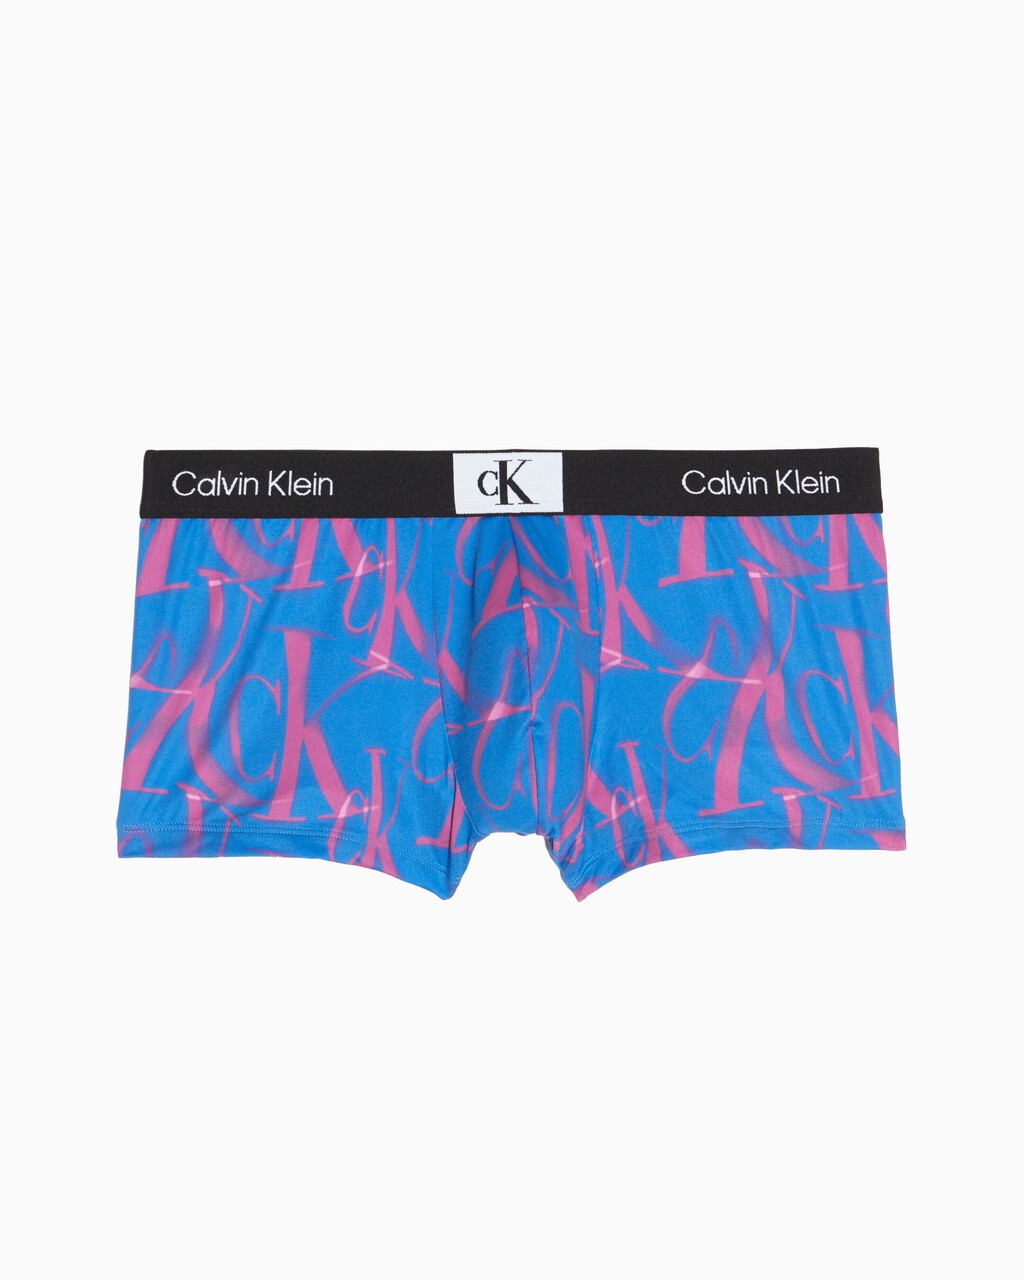 Calvin Klein 1996 Limited Edition Low Rise Trunk